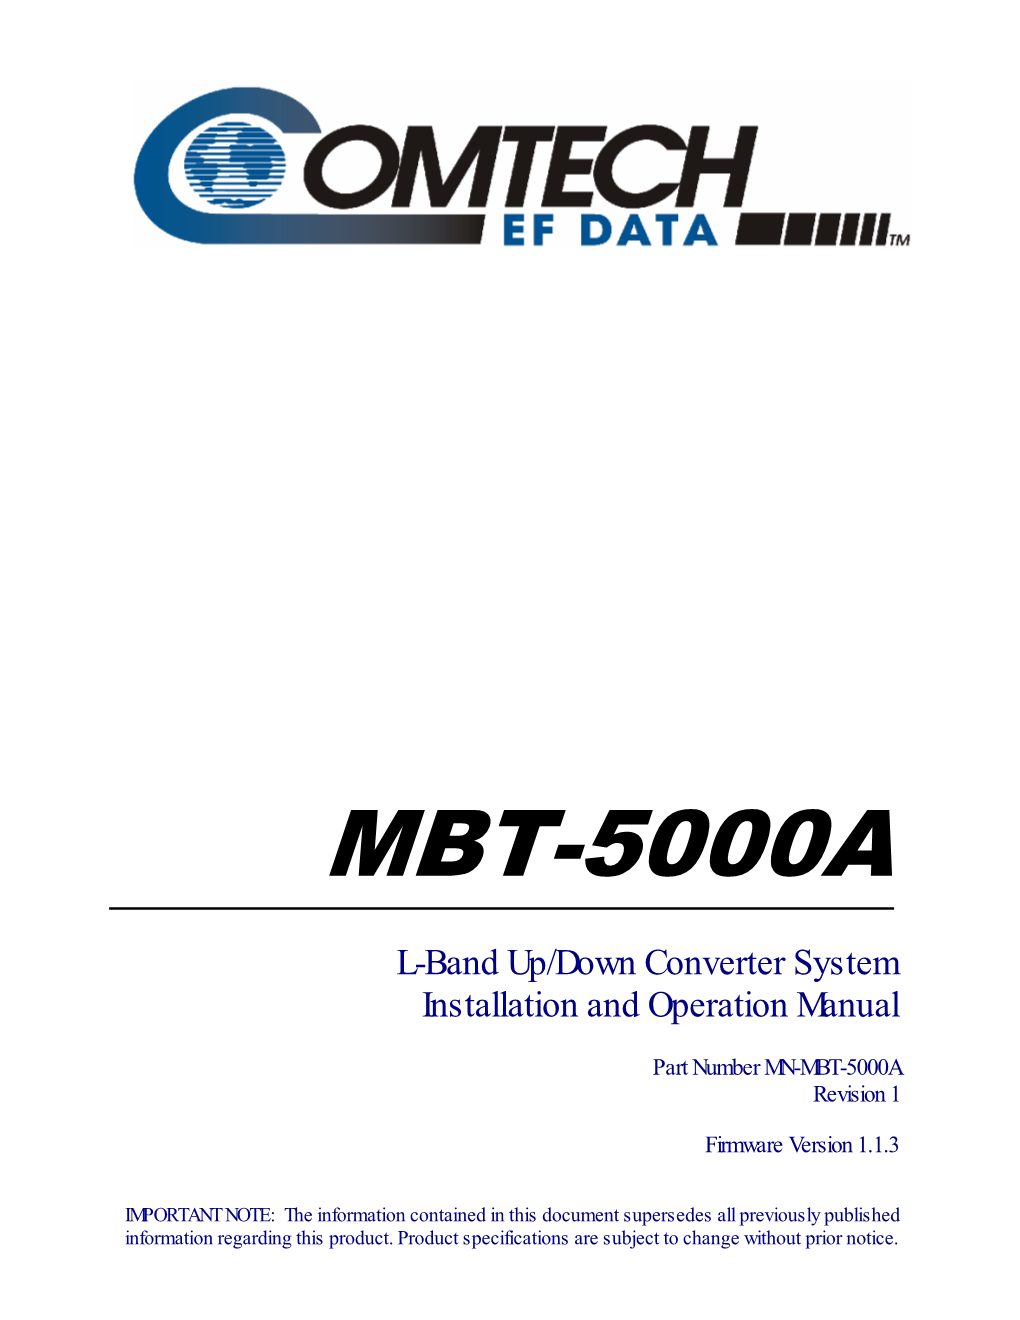 MBT-5000A L-Band Up/Down Converter Revision 1